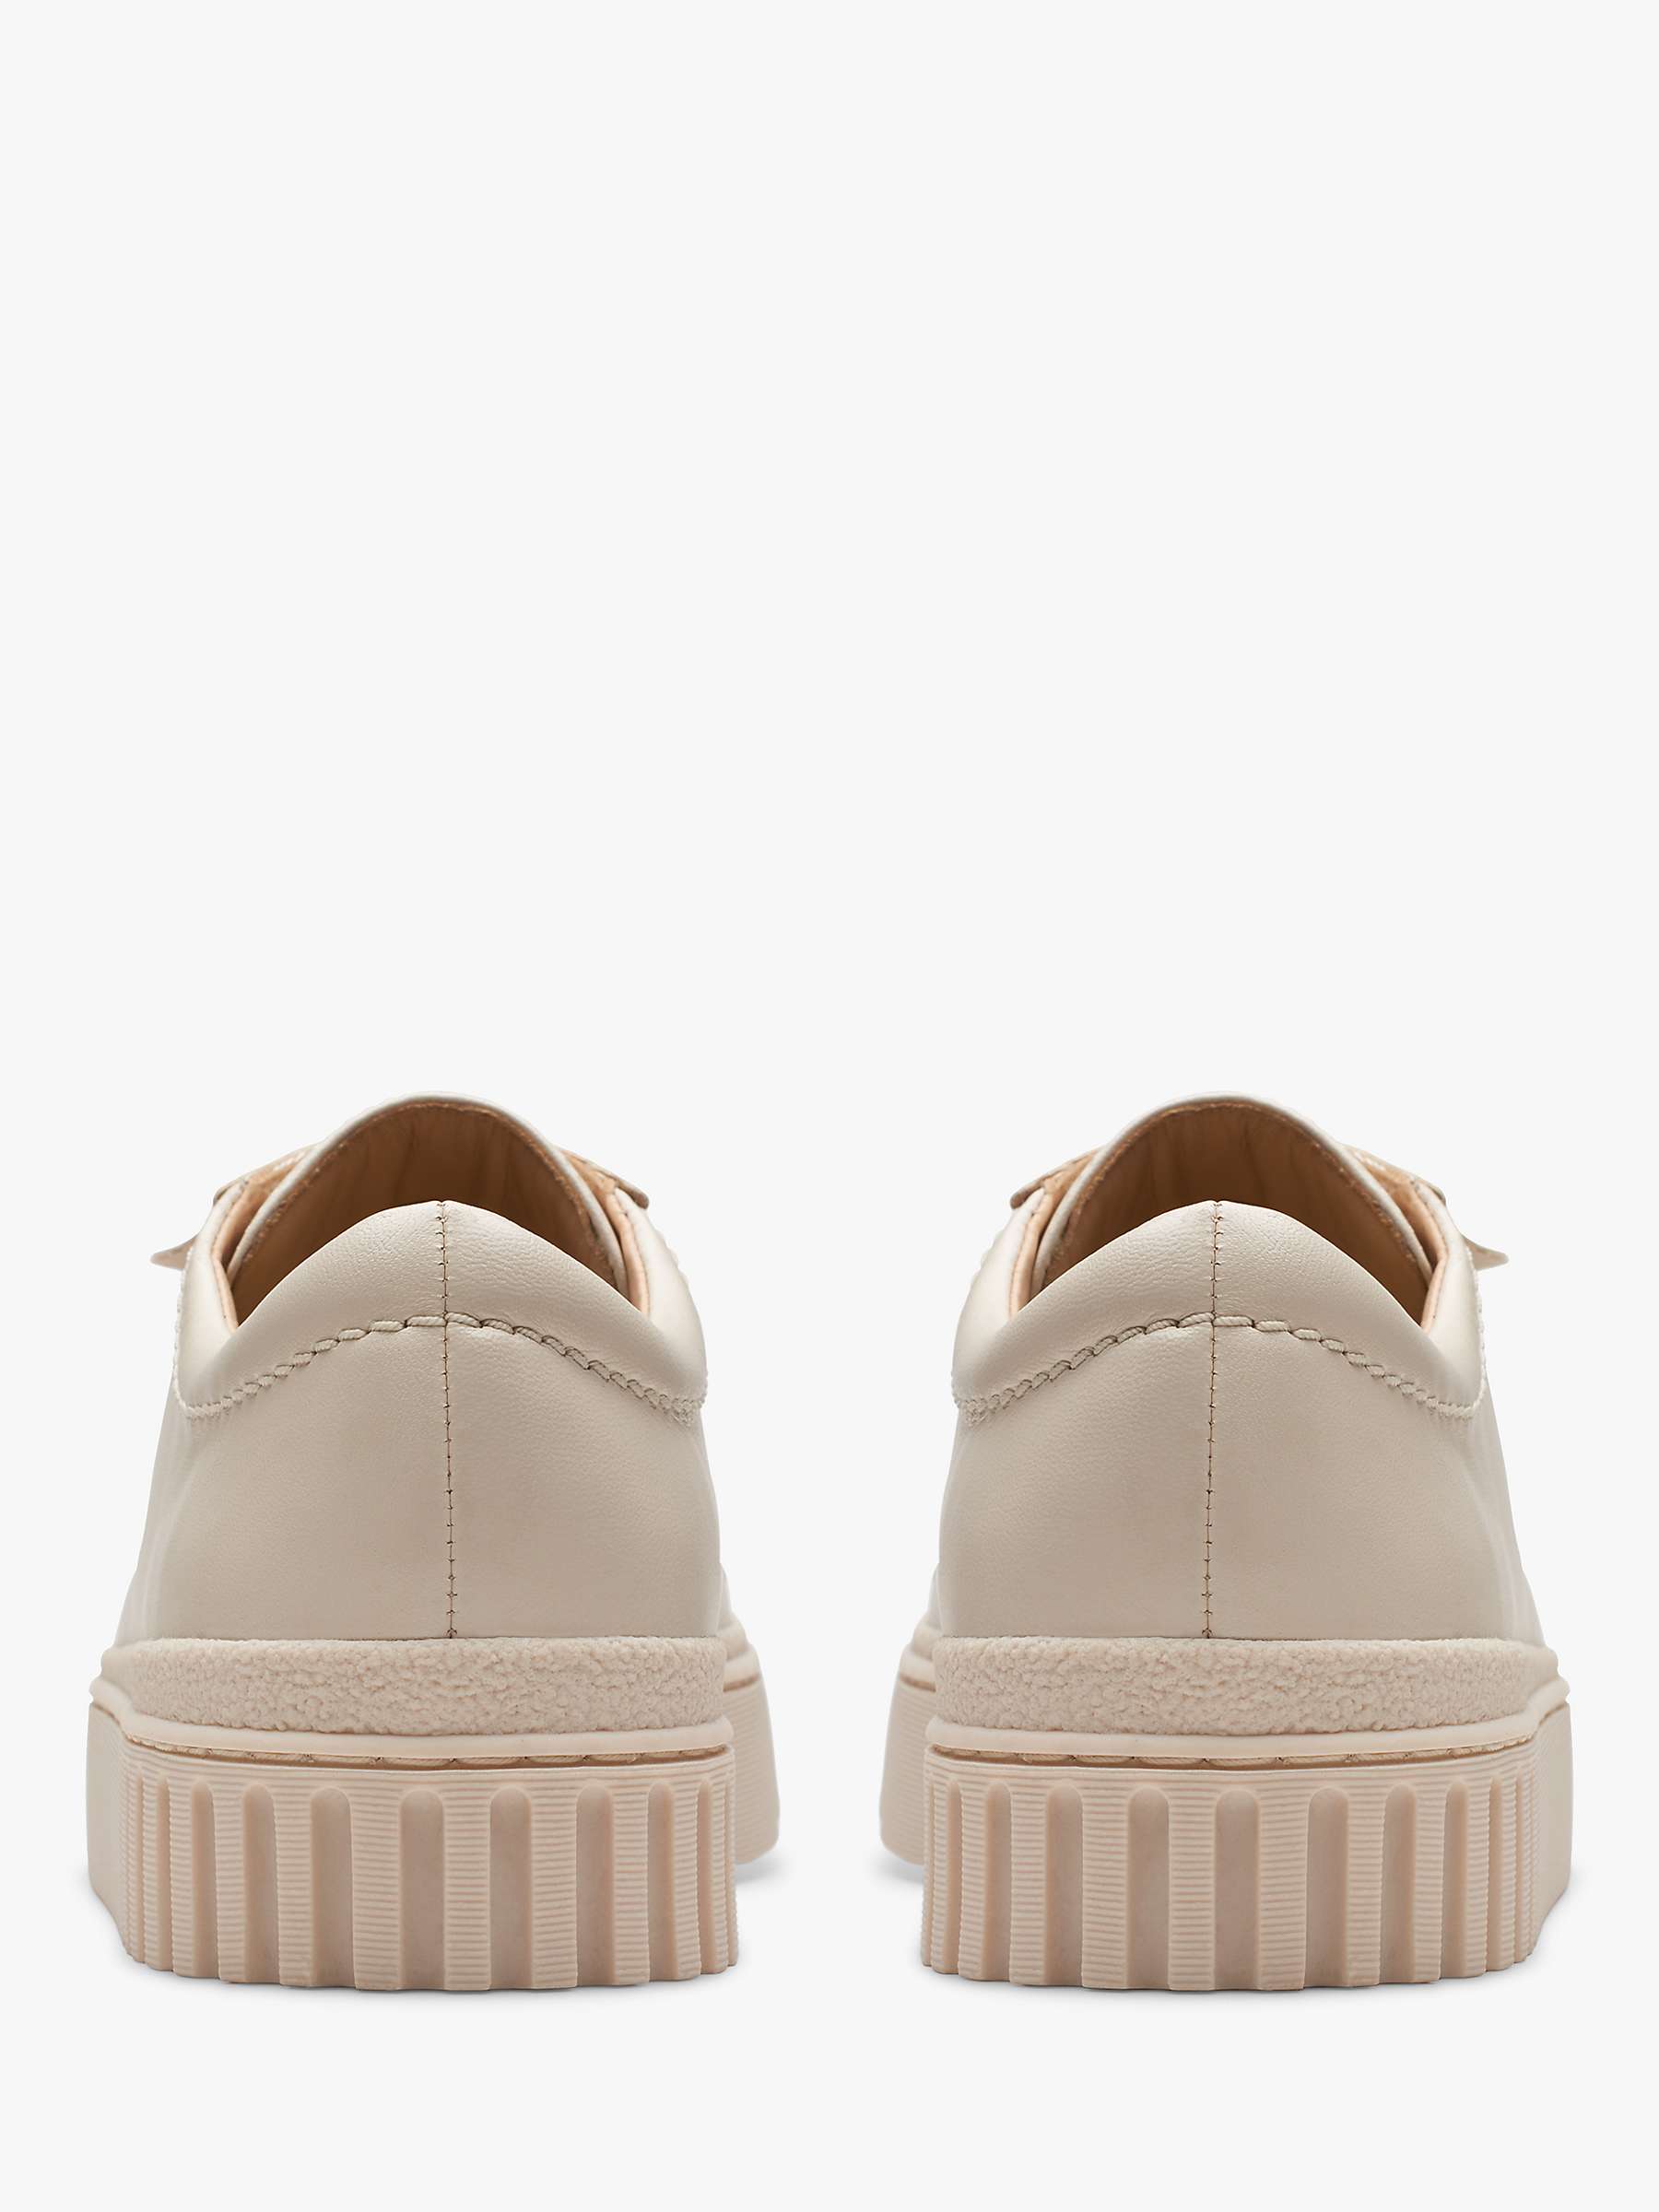 Buy Clarks Mayhill Walk Leather Flatform Trainers Online at johnlewis.com